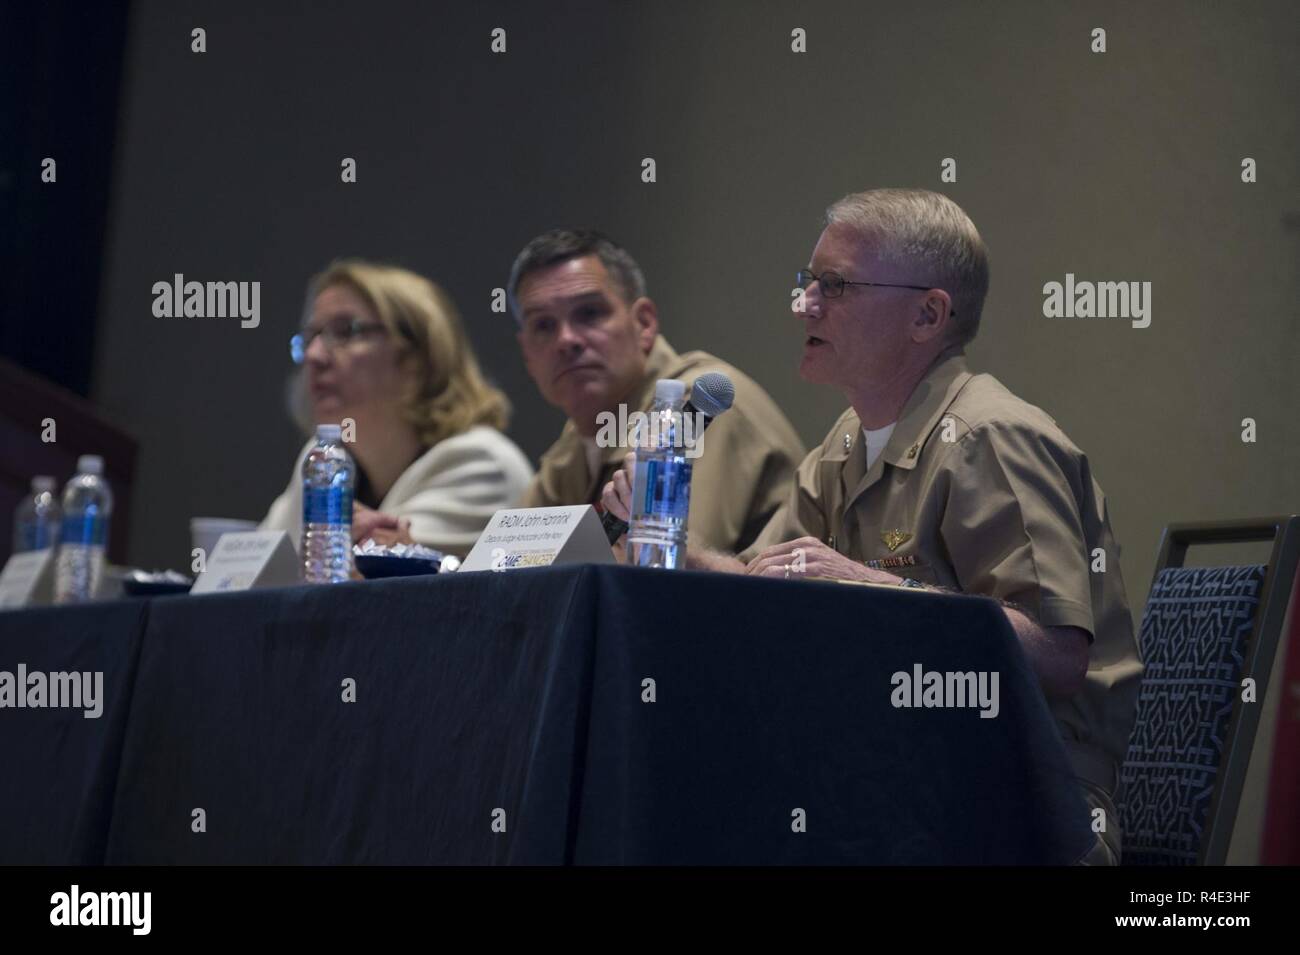 NATIONAL HARBOR, Md. (May. 1, 2017) Rear Adm. John Hannink, right, Deputy Judge Advocate General, is joined by Ms. Anne Brennan, Acting General Counsel of the Navy, left, and Maj. Gen. John Ewers, Staff Judge Advocate to the Commandant, for a Department of the Navy (DON) legal advisors panel during the DON Office of the General Counsel 2017 annual training symposium. Stock Photo